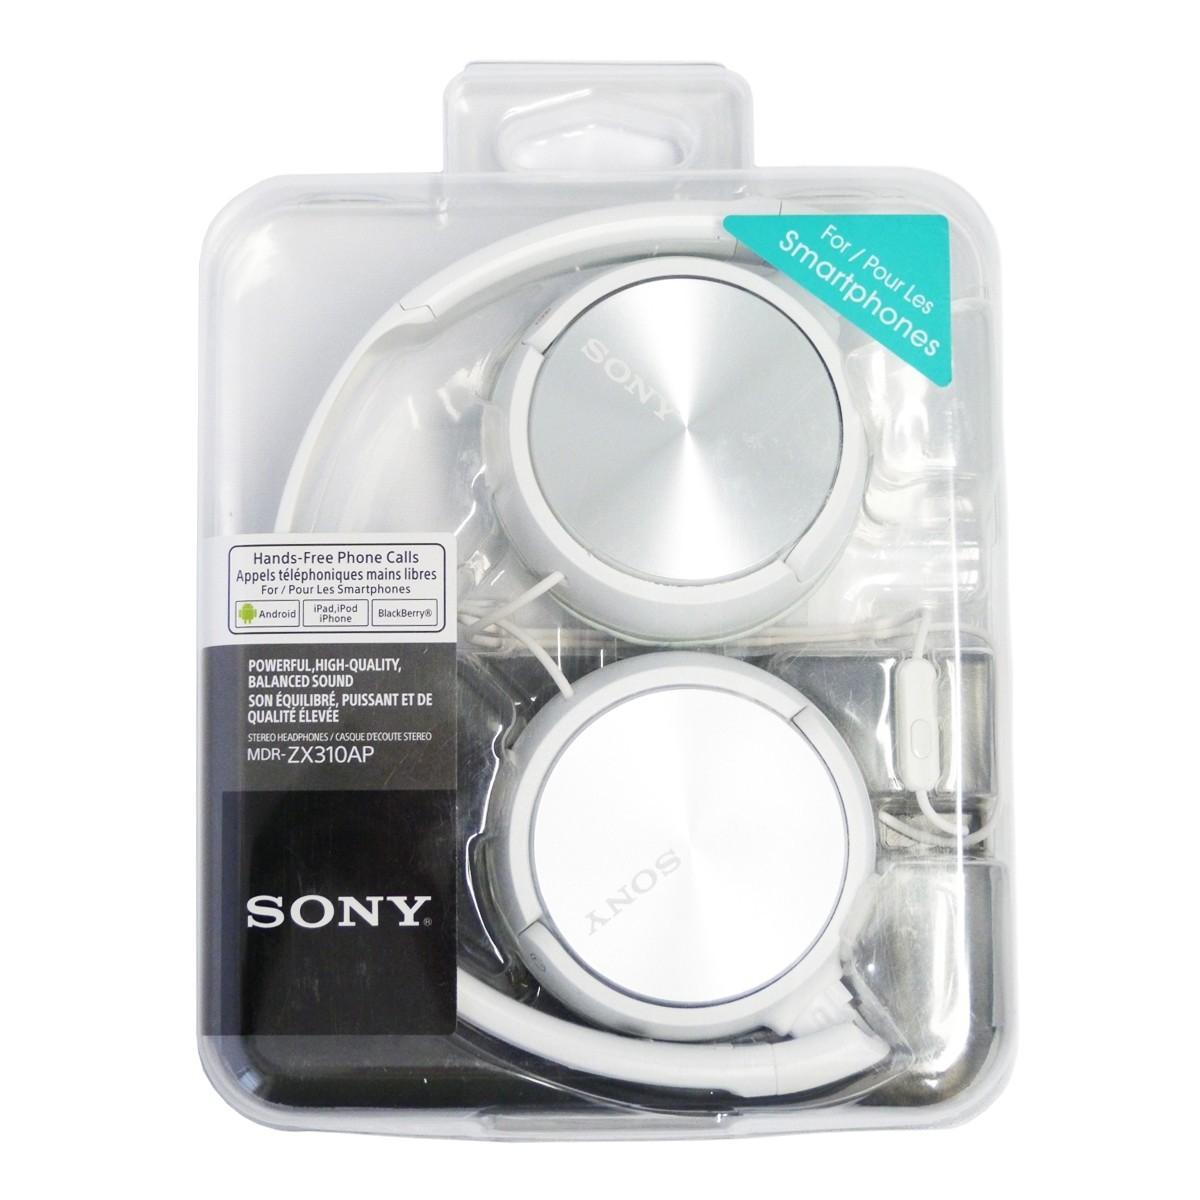 Sony mdr zx310ap. Sony MDR-zx310. Zx310 Sony белые. Sony MDR-zx310ap белый. Наушники Sony MDR-zx310 White.